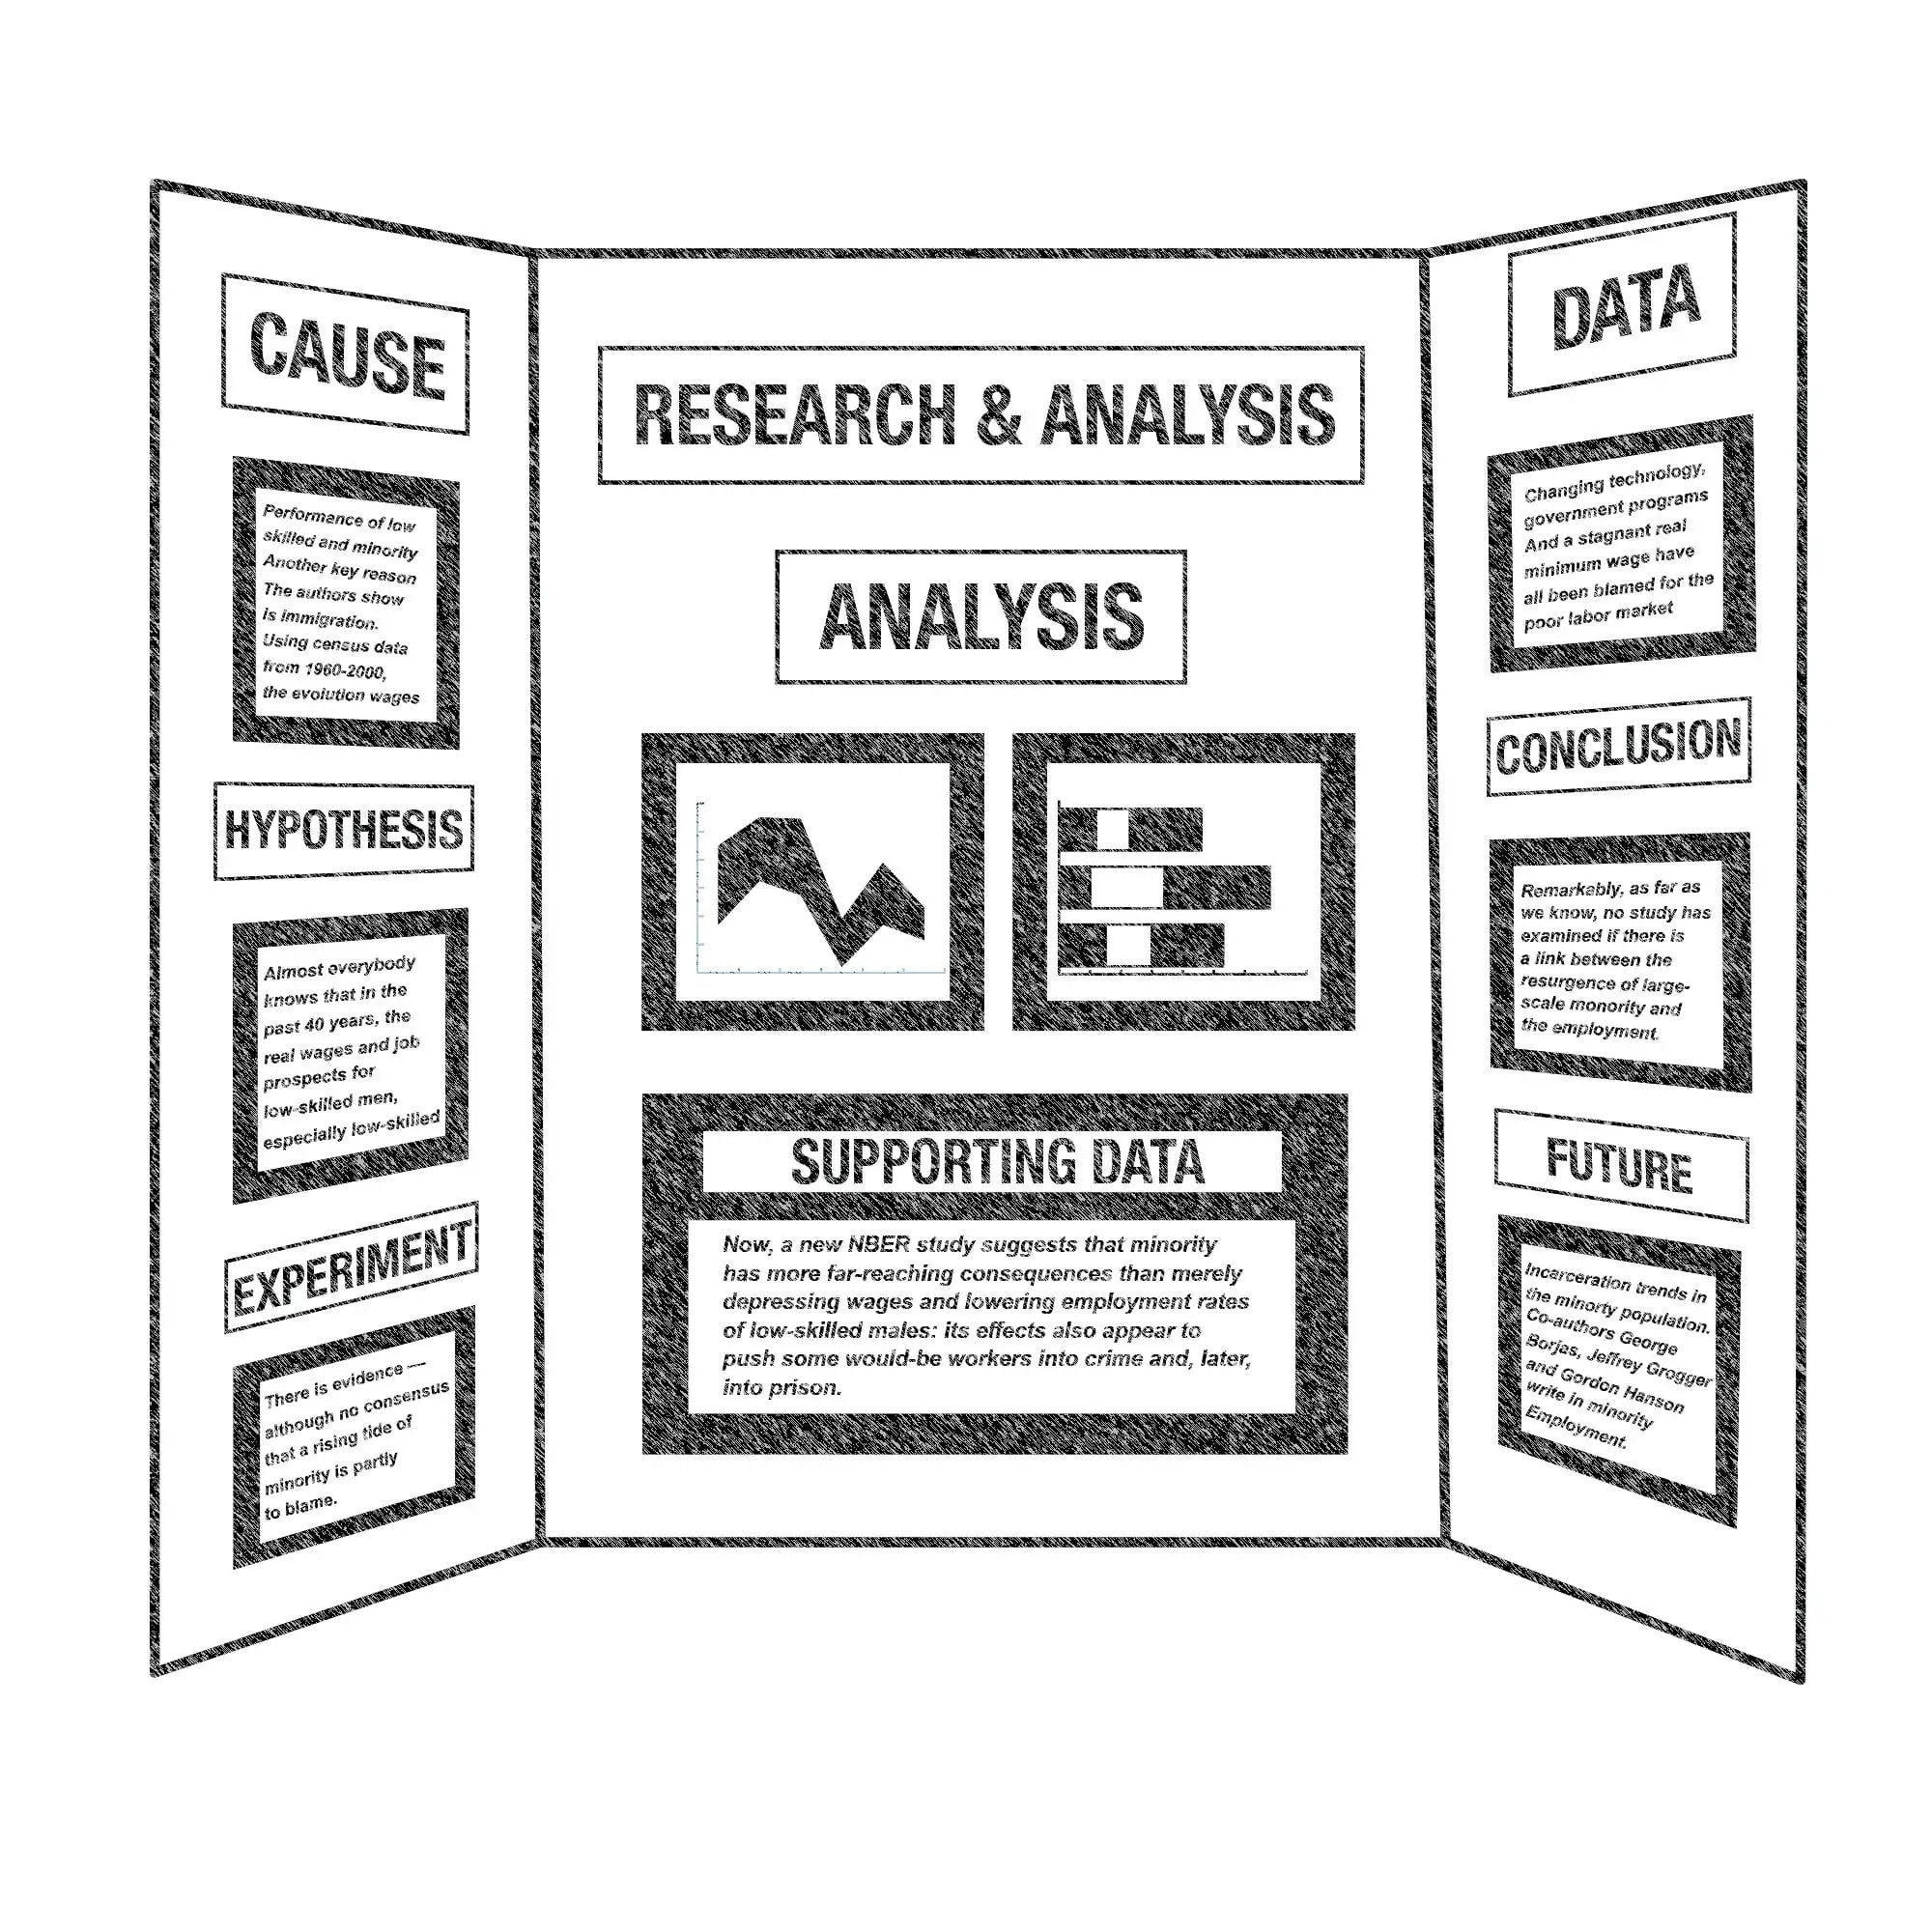 Science fair trifold poster board